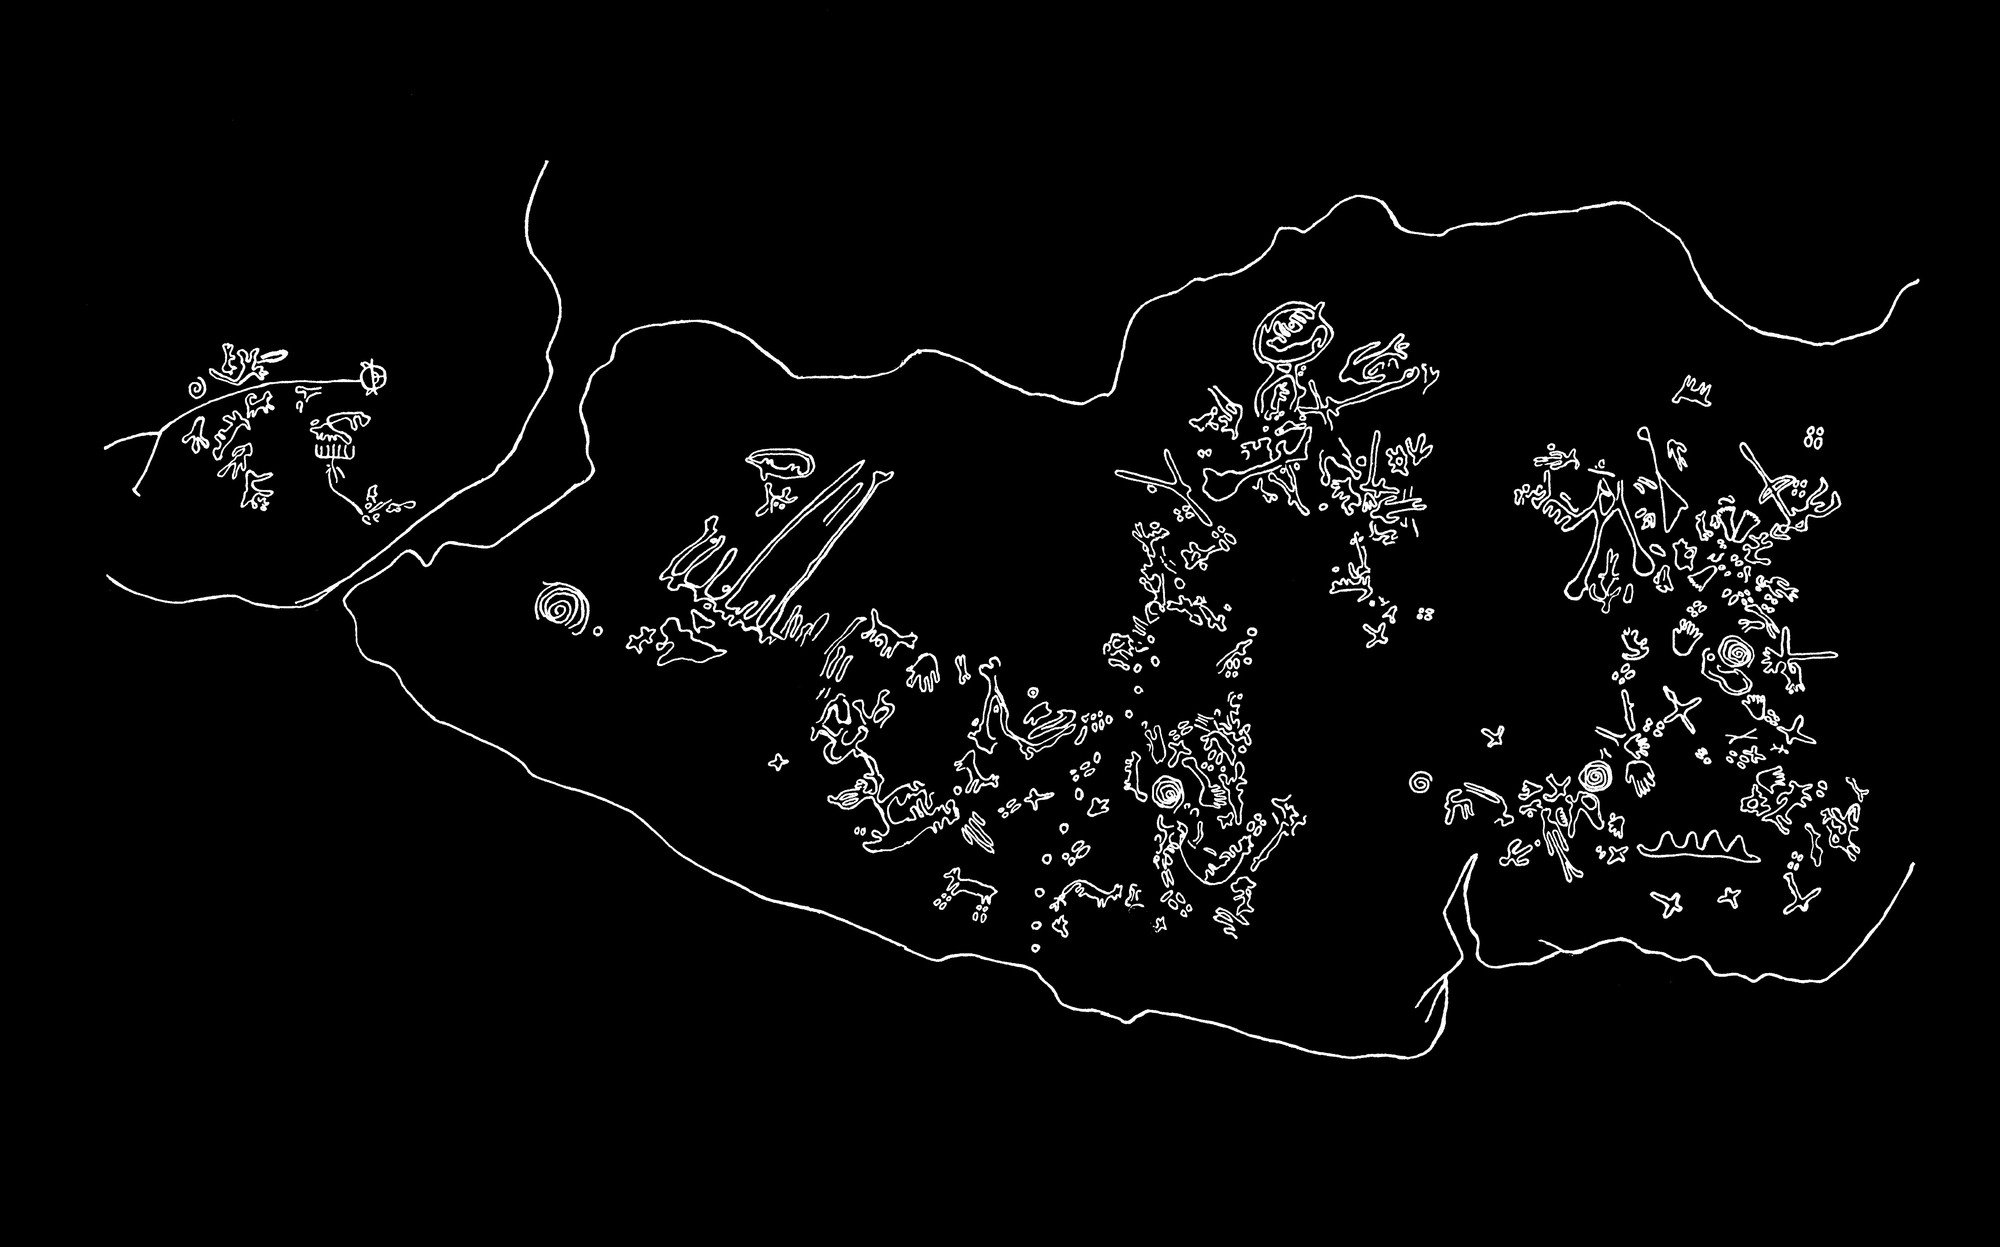 Inverse image of map of the Sanilac petroglyphs crafted by Darrel J. Richards, circa 1940.